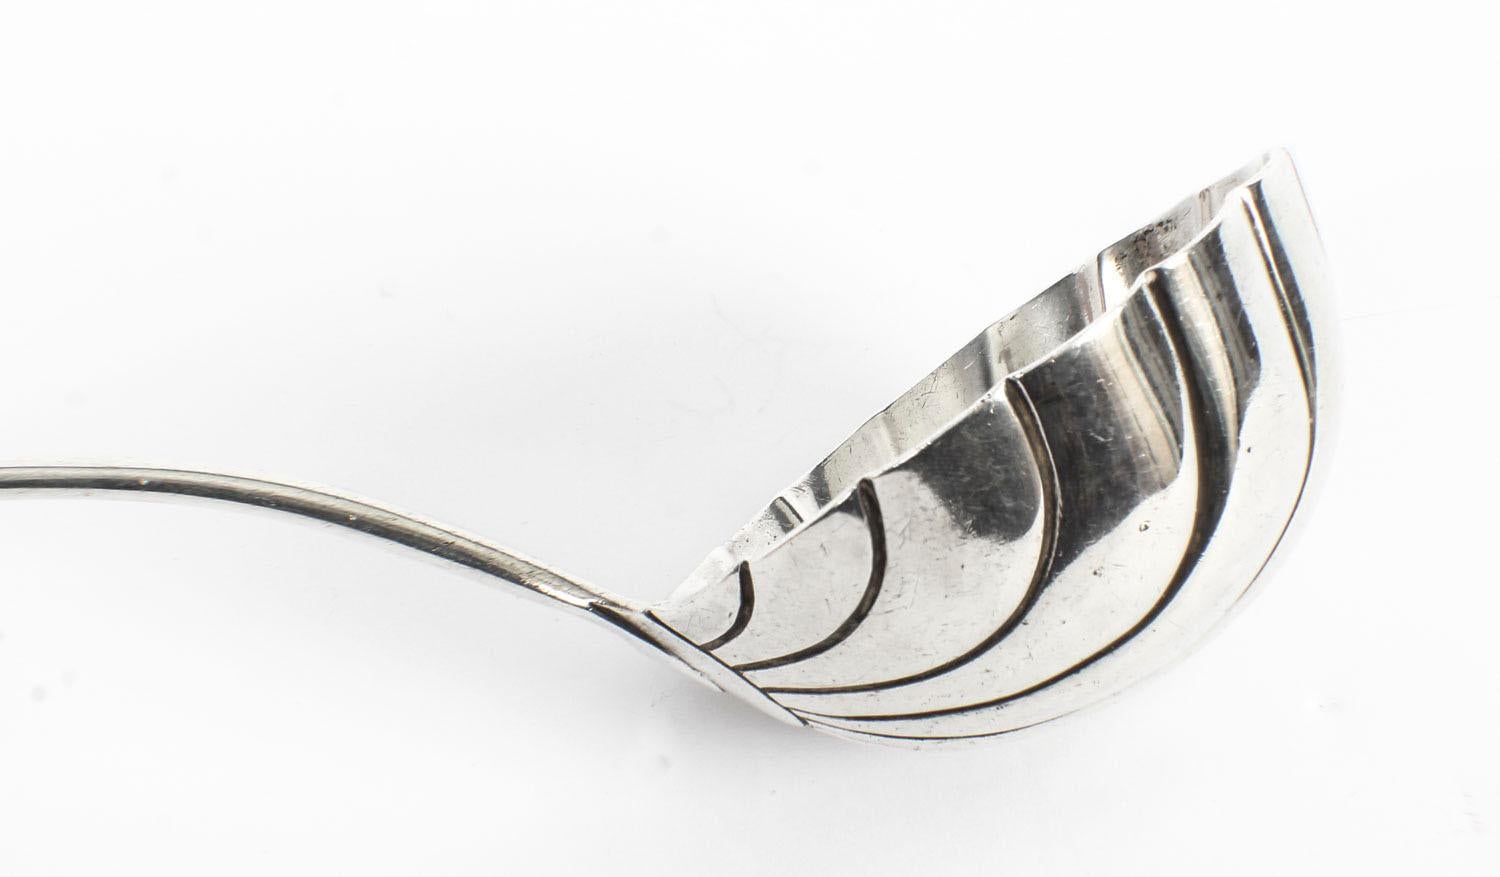 This is an exquisite English sterling soup ladle, with hallmarks for London 1959 and the maker's mark of the renowned London silversmith C.S.Harris & Sons Ltd.

Add a touch of classical elegance to your next dining experience with this lovely